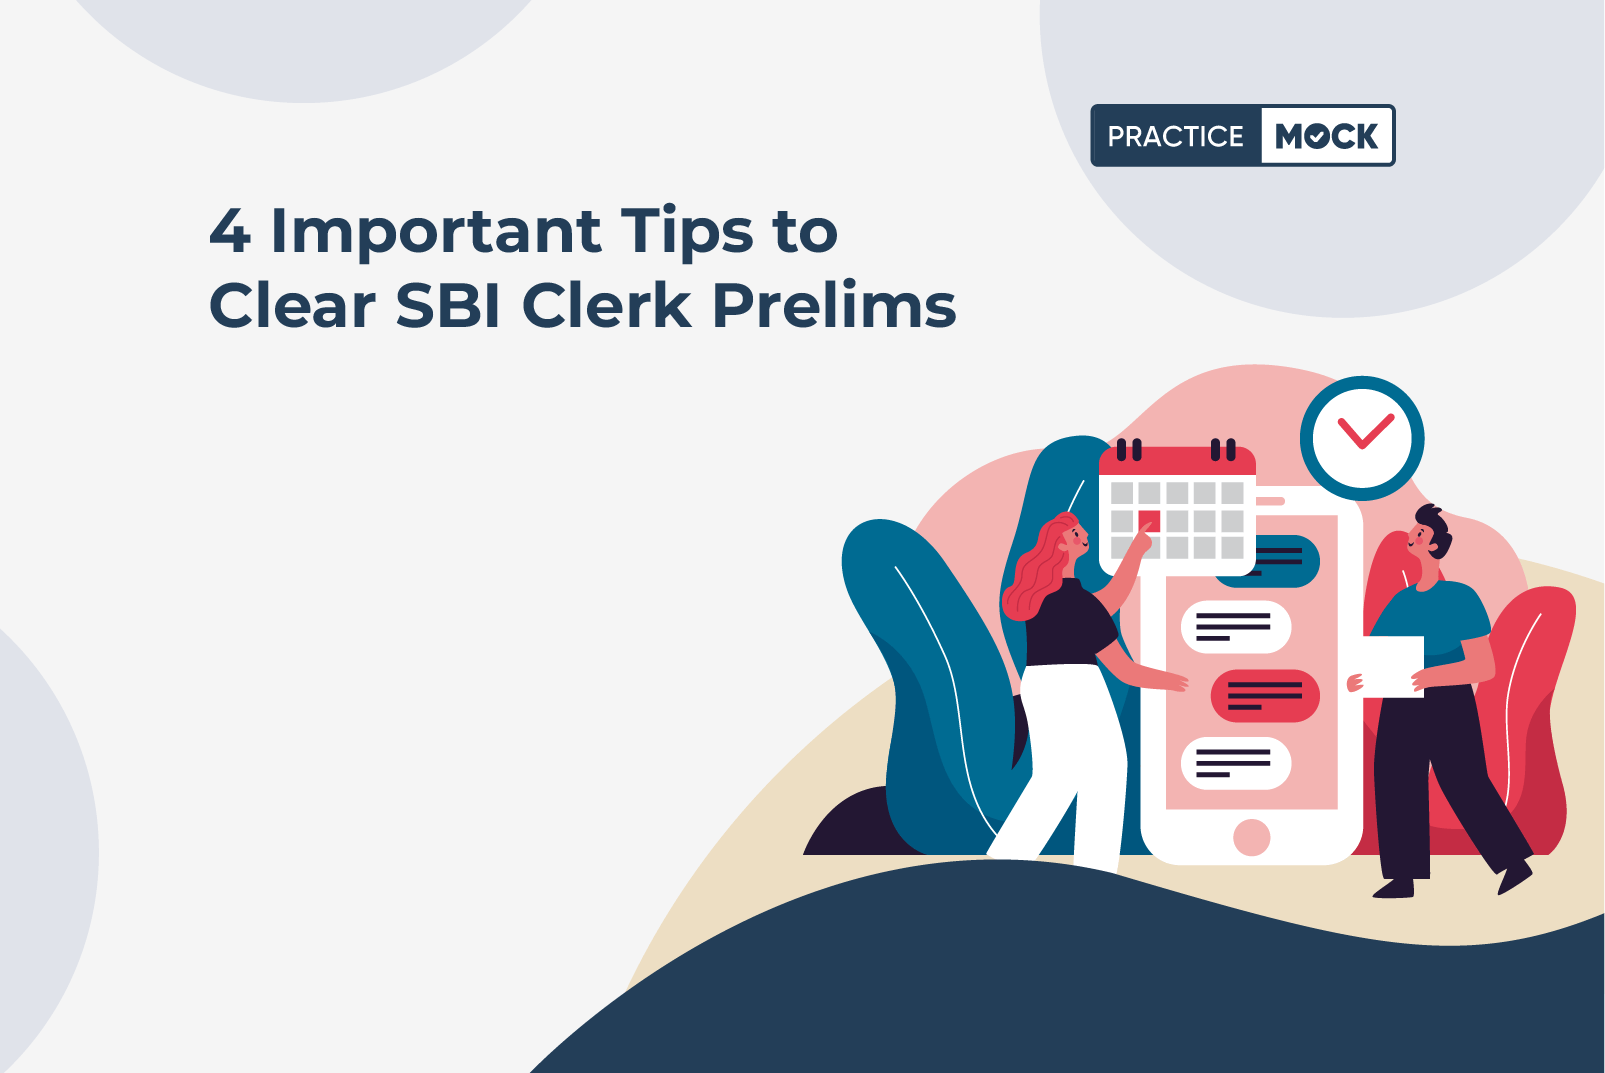 4 Important Tips to Clear SBI Clerk Prelims (1)